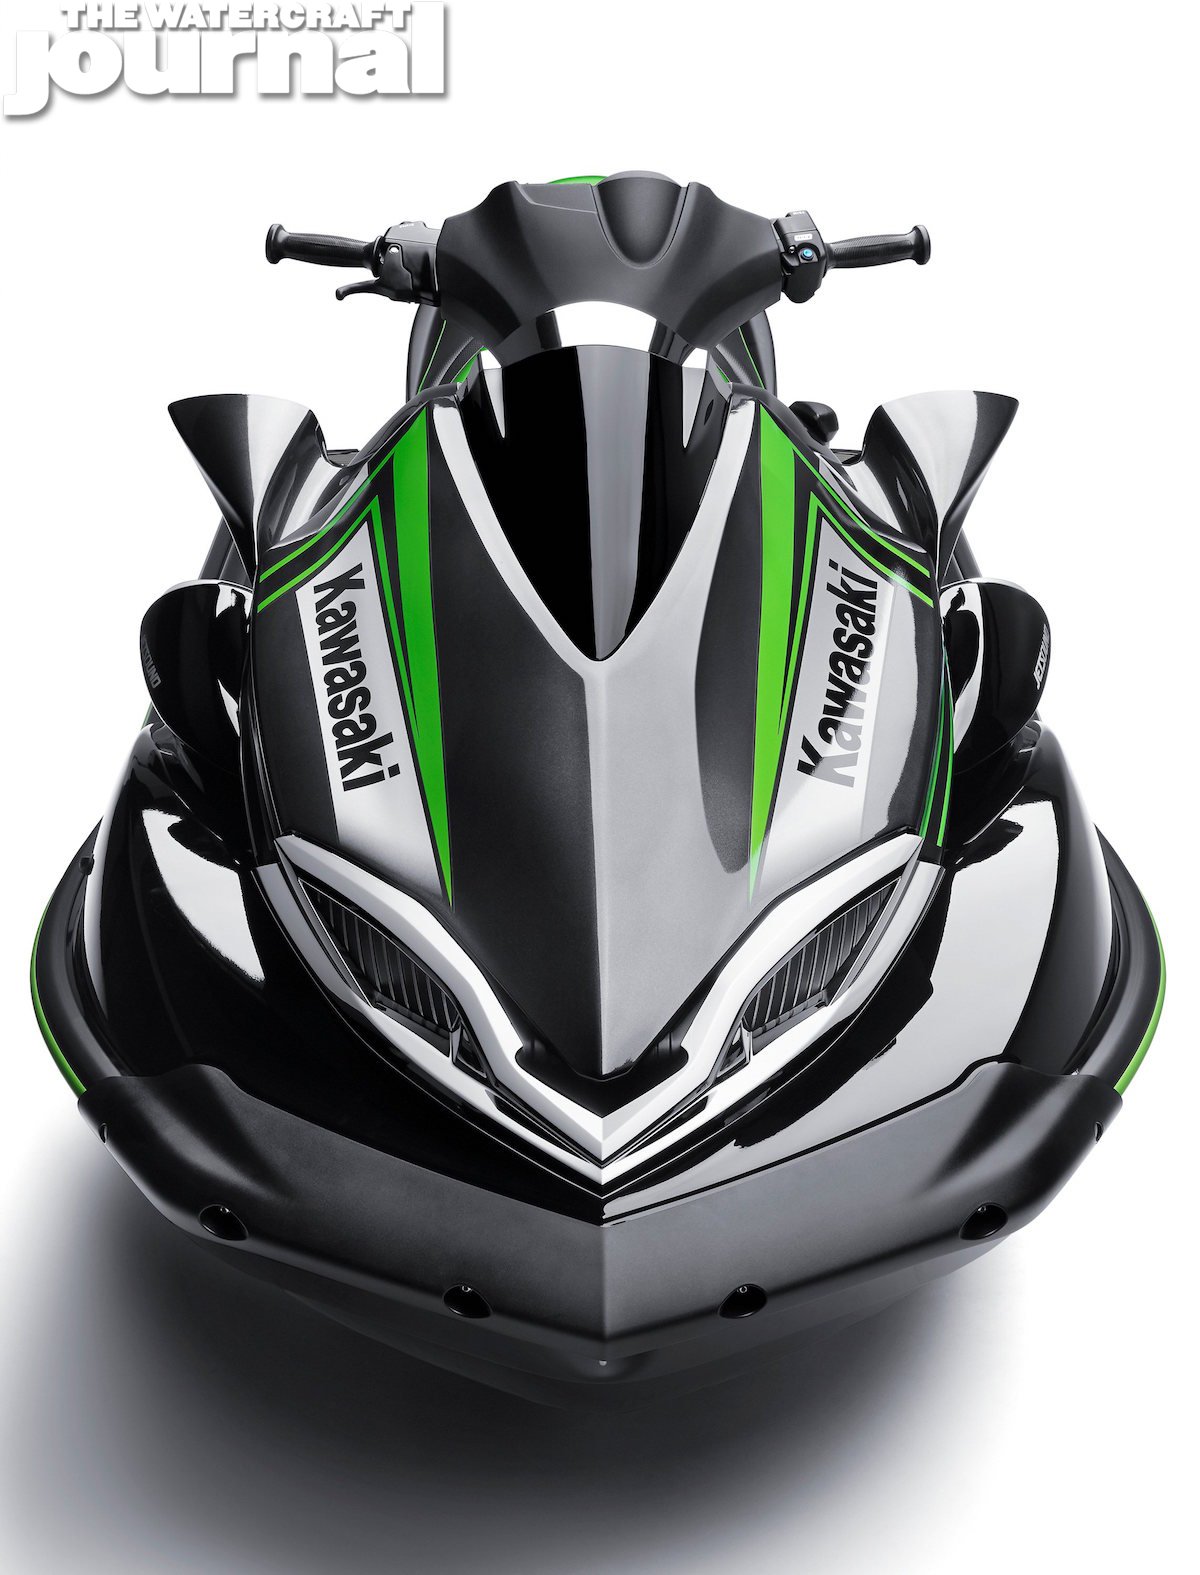 forestille Øst Timor præst Gallery: 2016 Kawasaki JetSki Lineup Revealed - The Watercraft Journal |  the best resource for JetSki, WaveRunner, and SeaDoo enthusiasts and most  popular Personal WaterCraft site in the world!